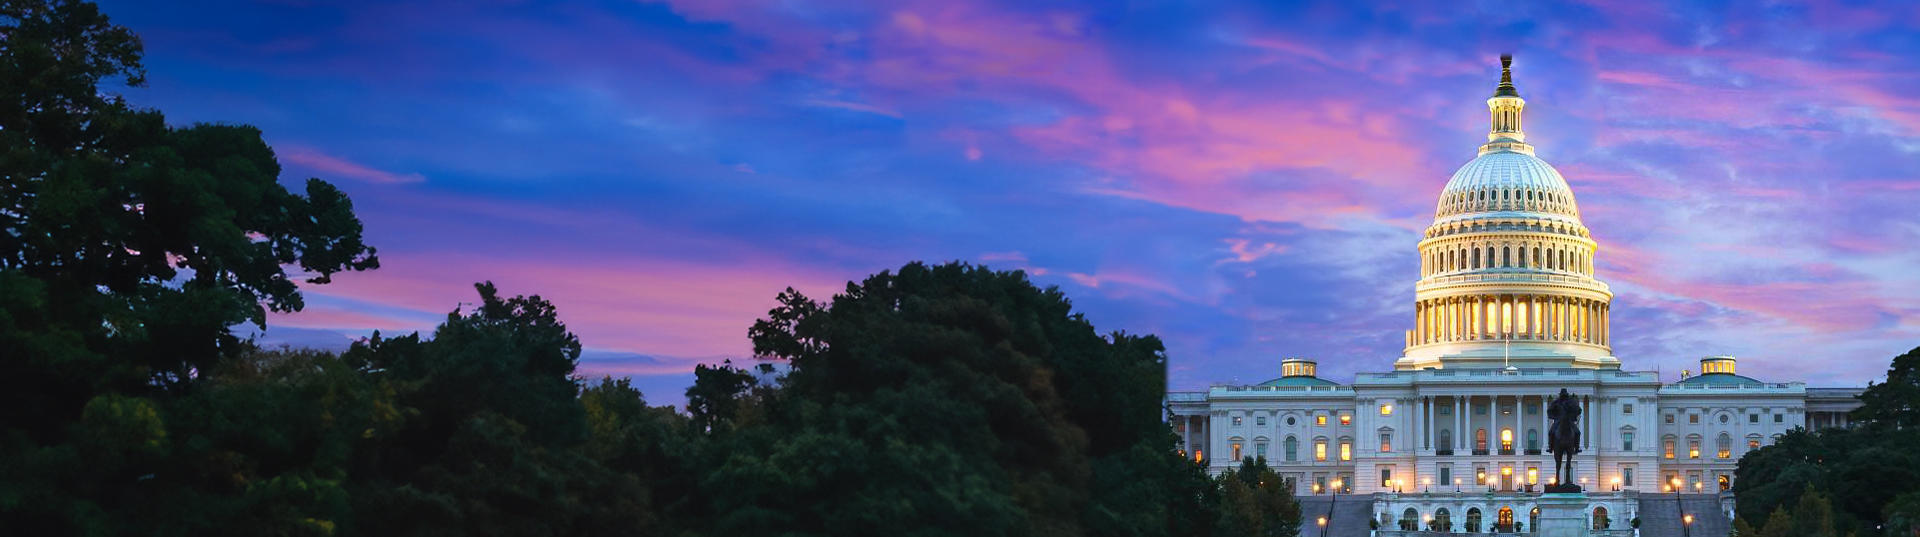 capitol building at sunset